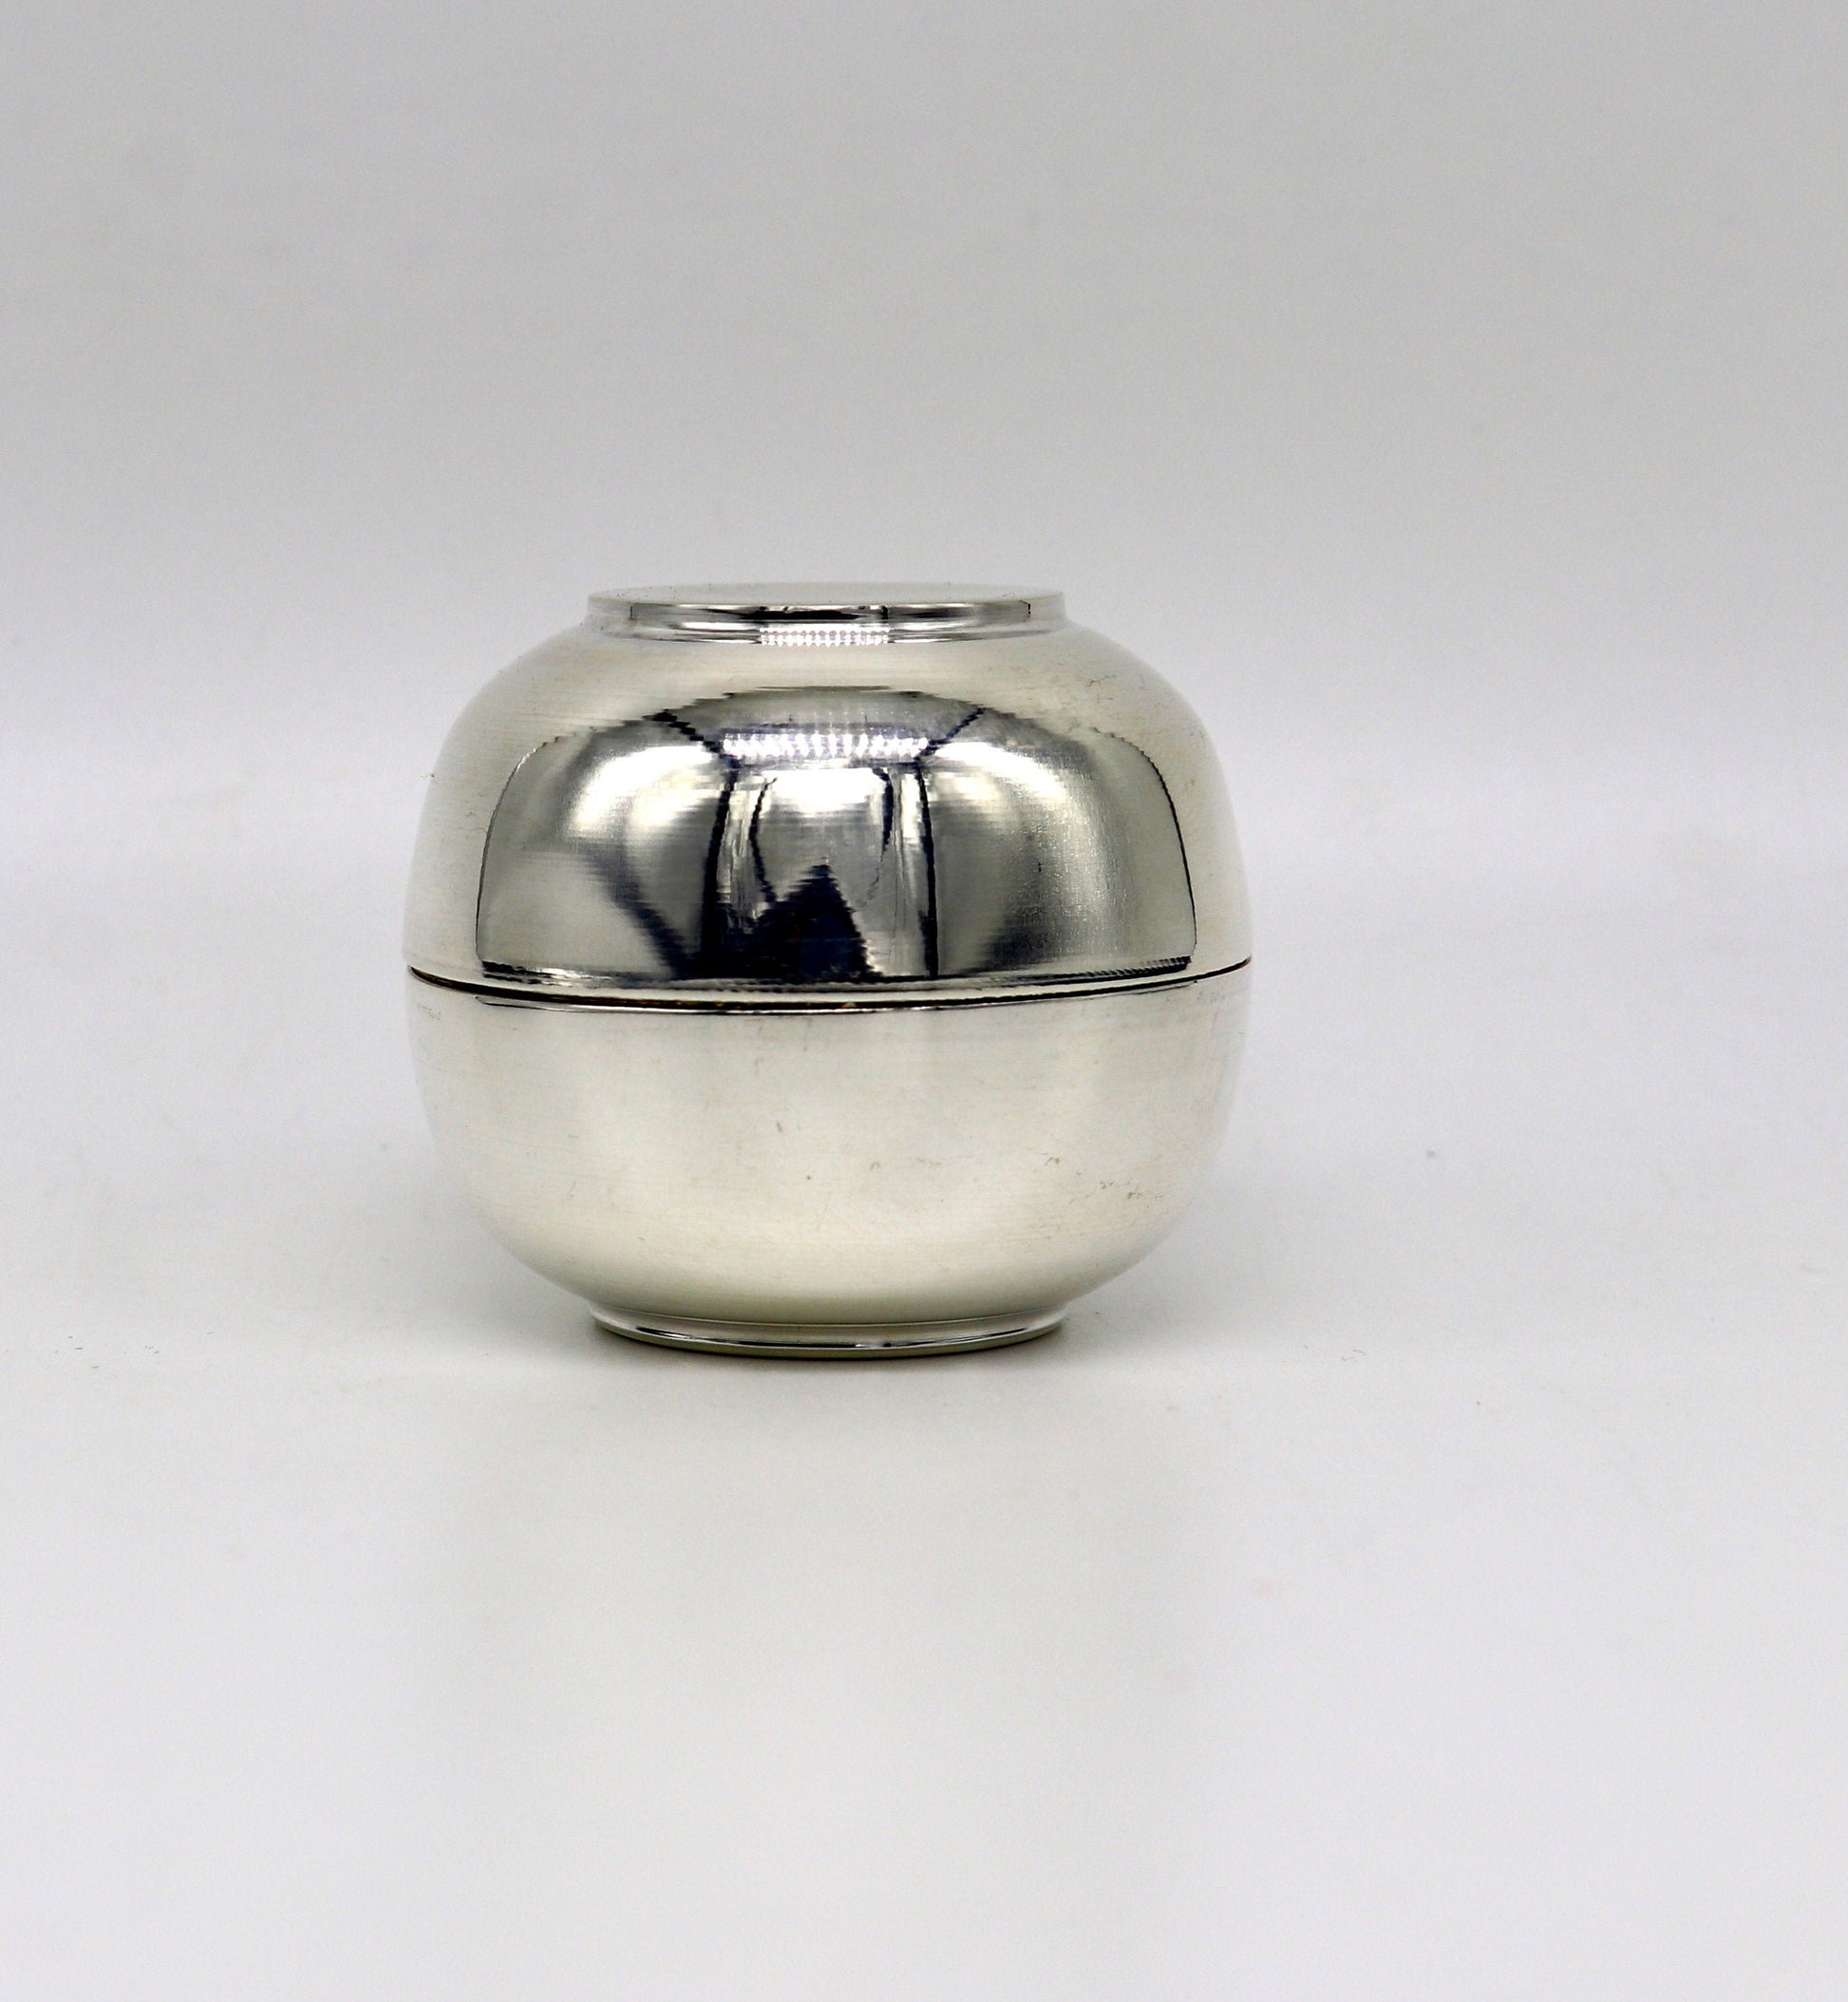 999 fine silver handmade Prasad box with cap for idols, trinket box, container box, brides gifting, jewelry box, solid silver article stb96 - TRIBAL ORNAMENTS